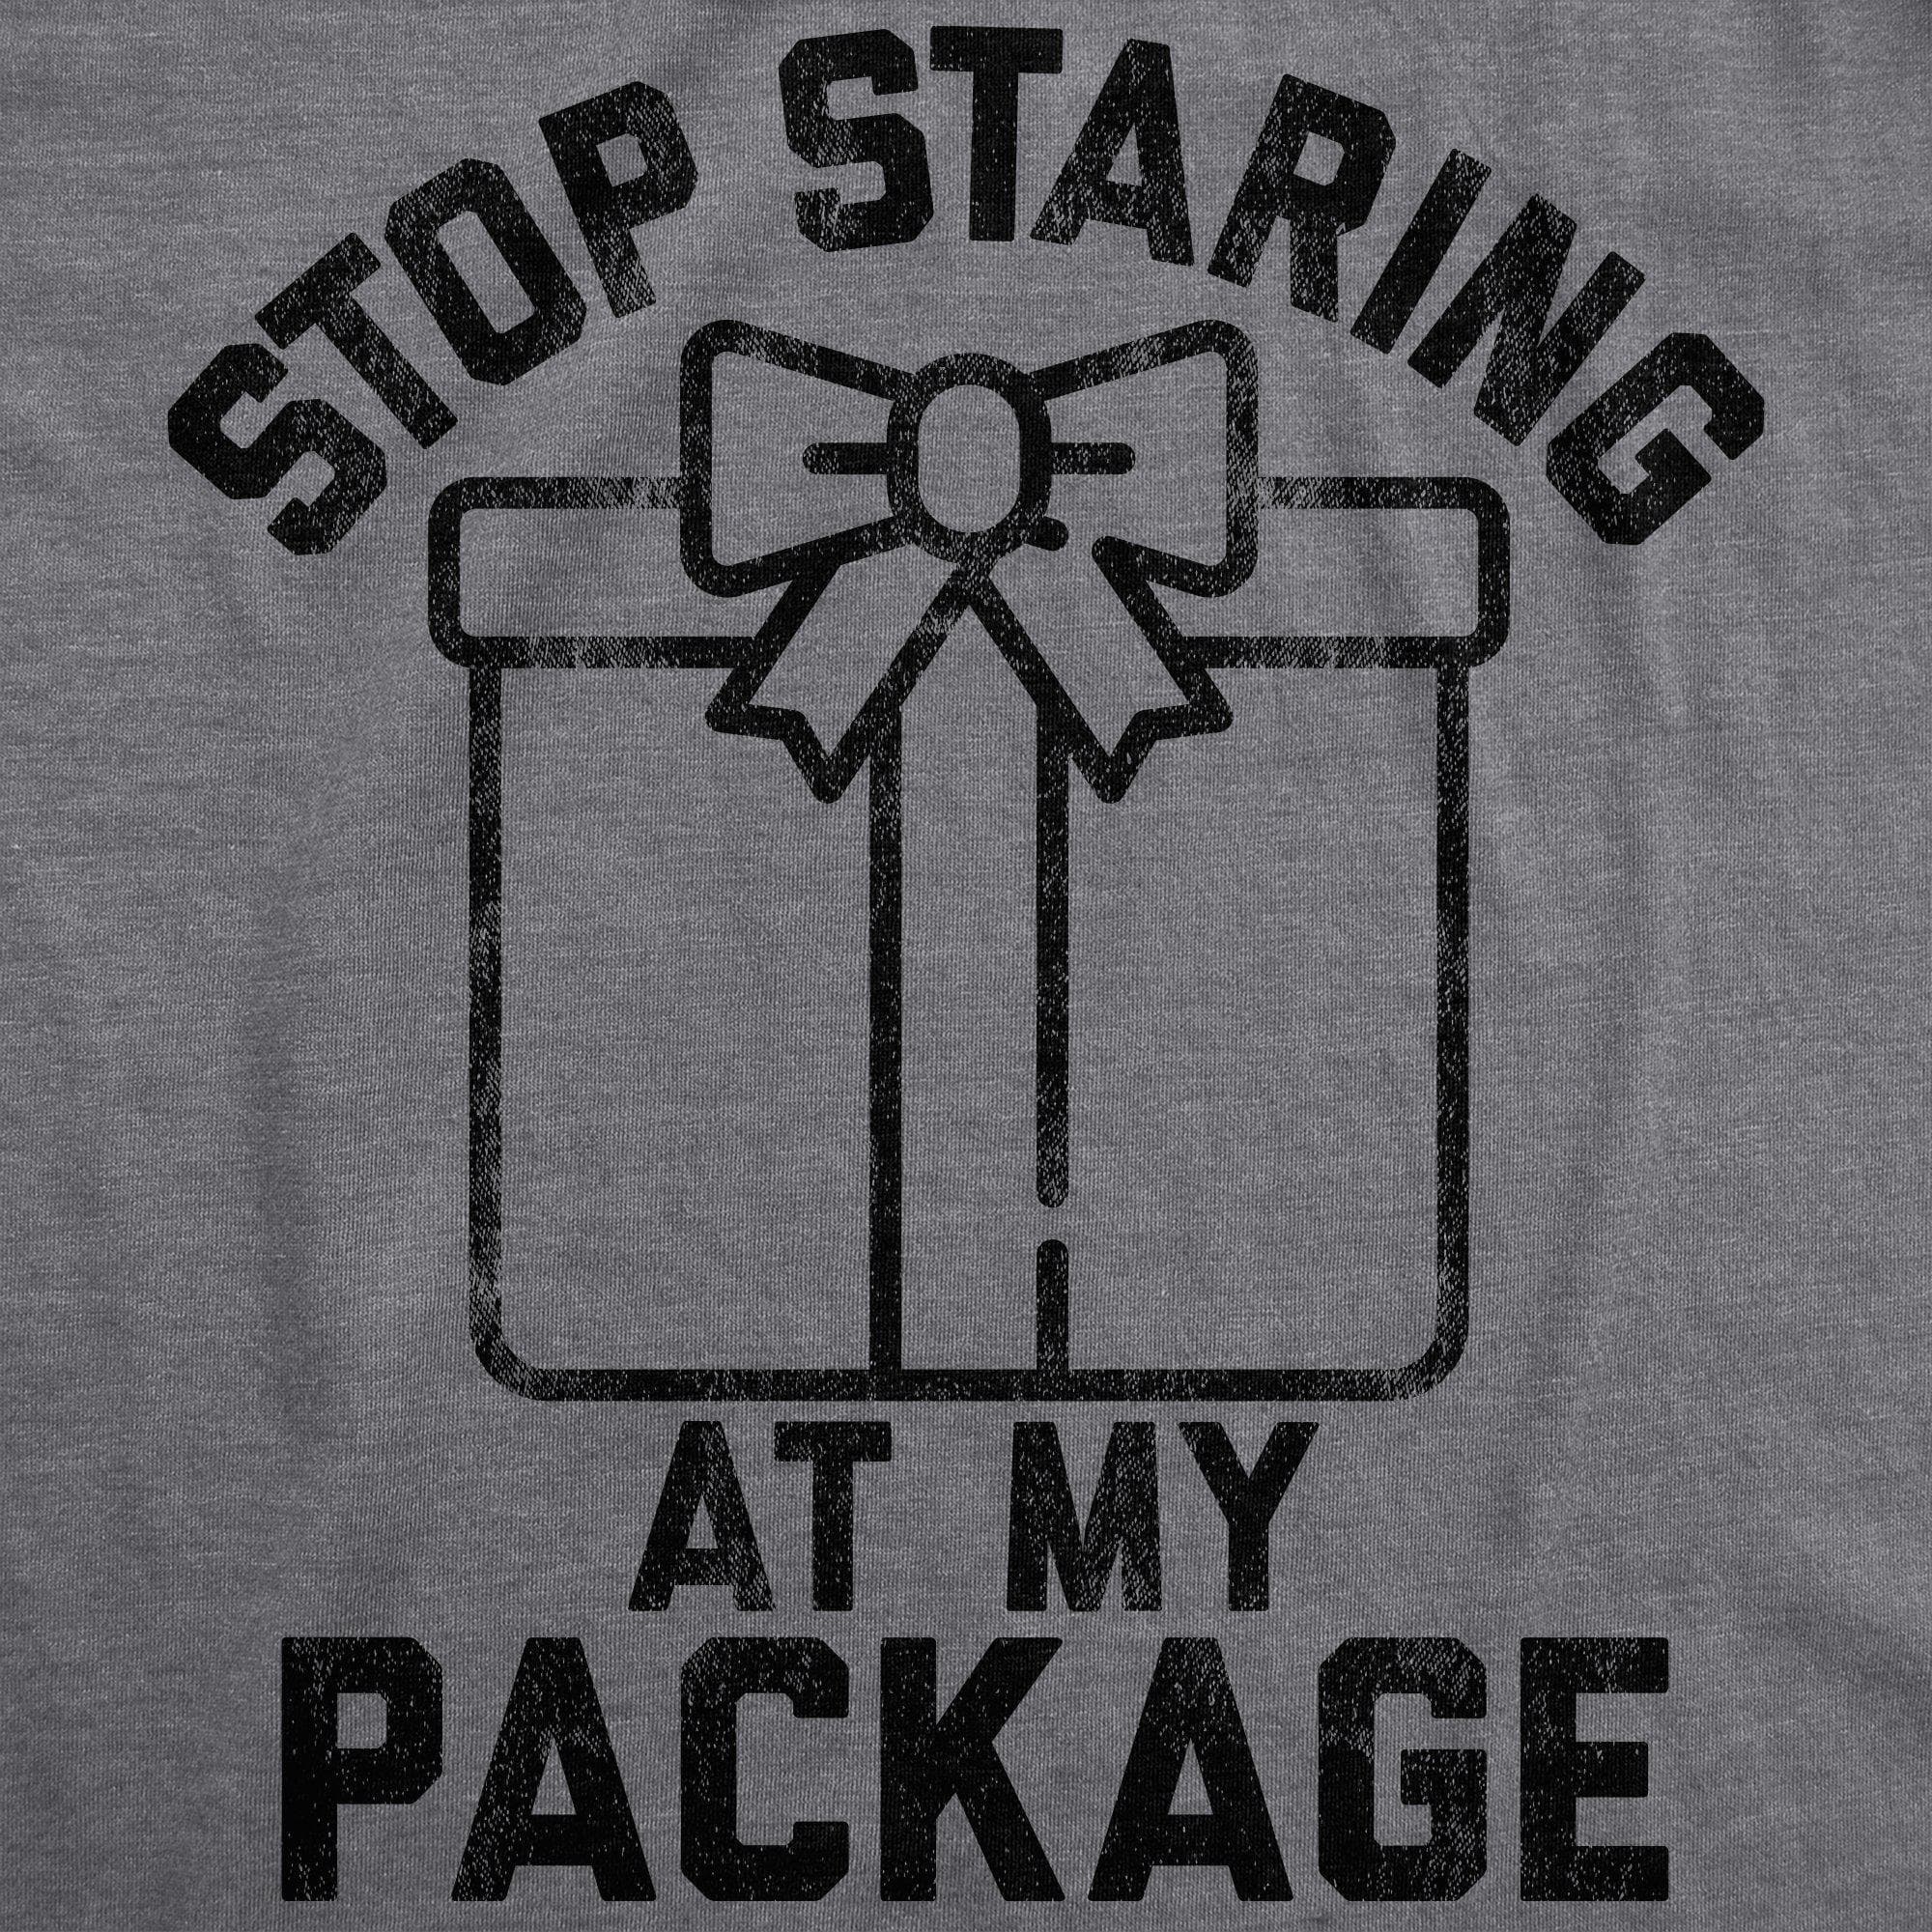 Stop Staring At My Package Men's Tshirt - Crazy Dog T-Shirts